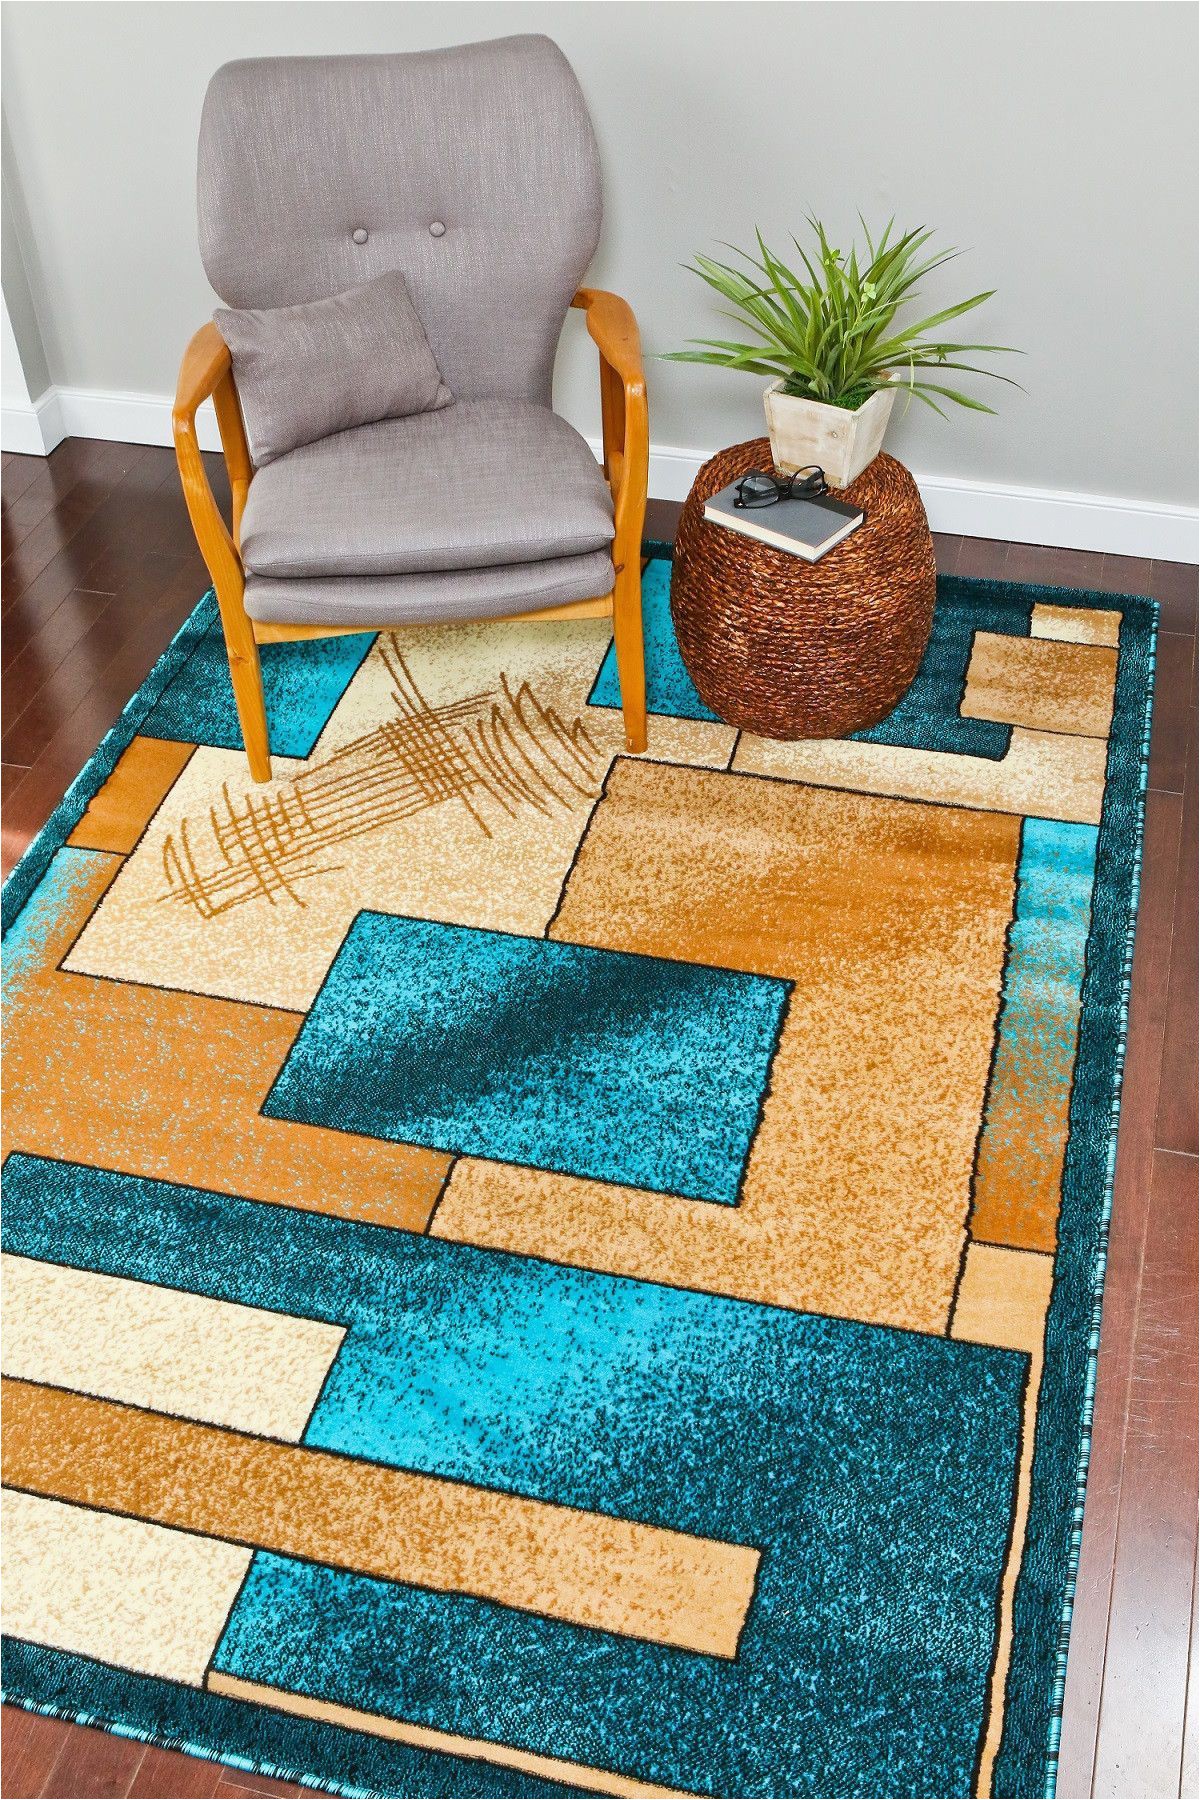 Teal and Brown area Rug Walmart 1657 Turquoise